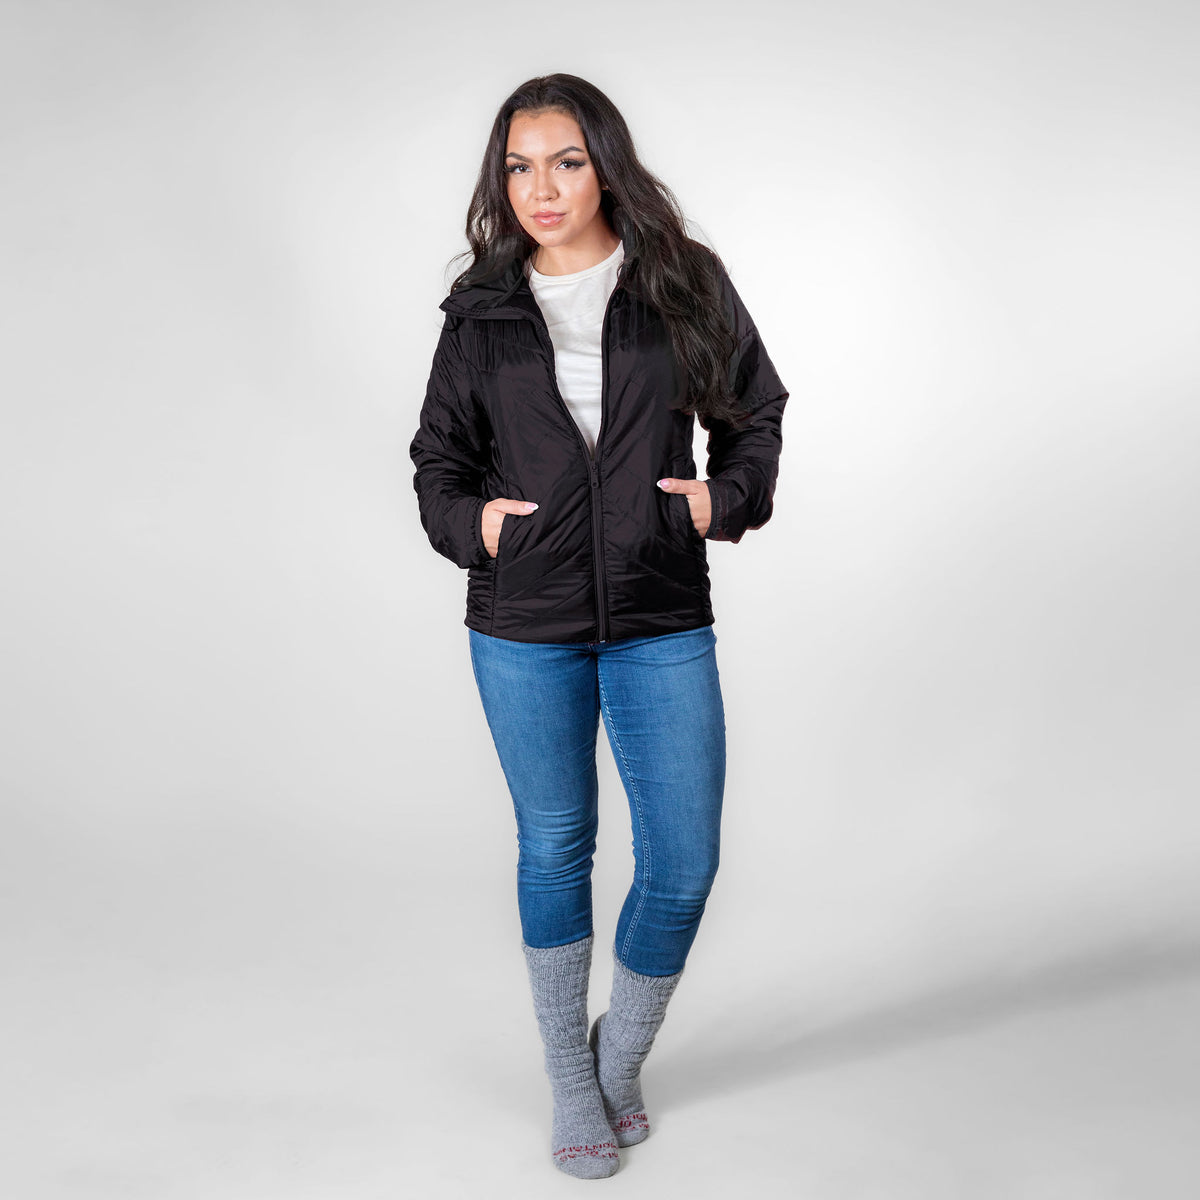 Front facing woman wearing black alpaca single layer winter jacket with blue jeans and winter alpaca socks